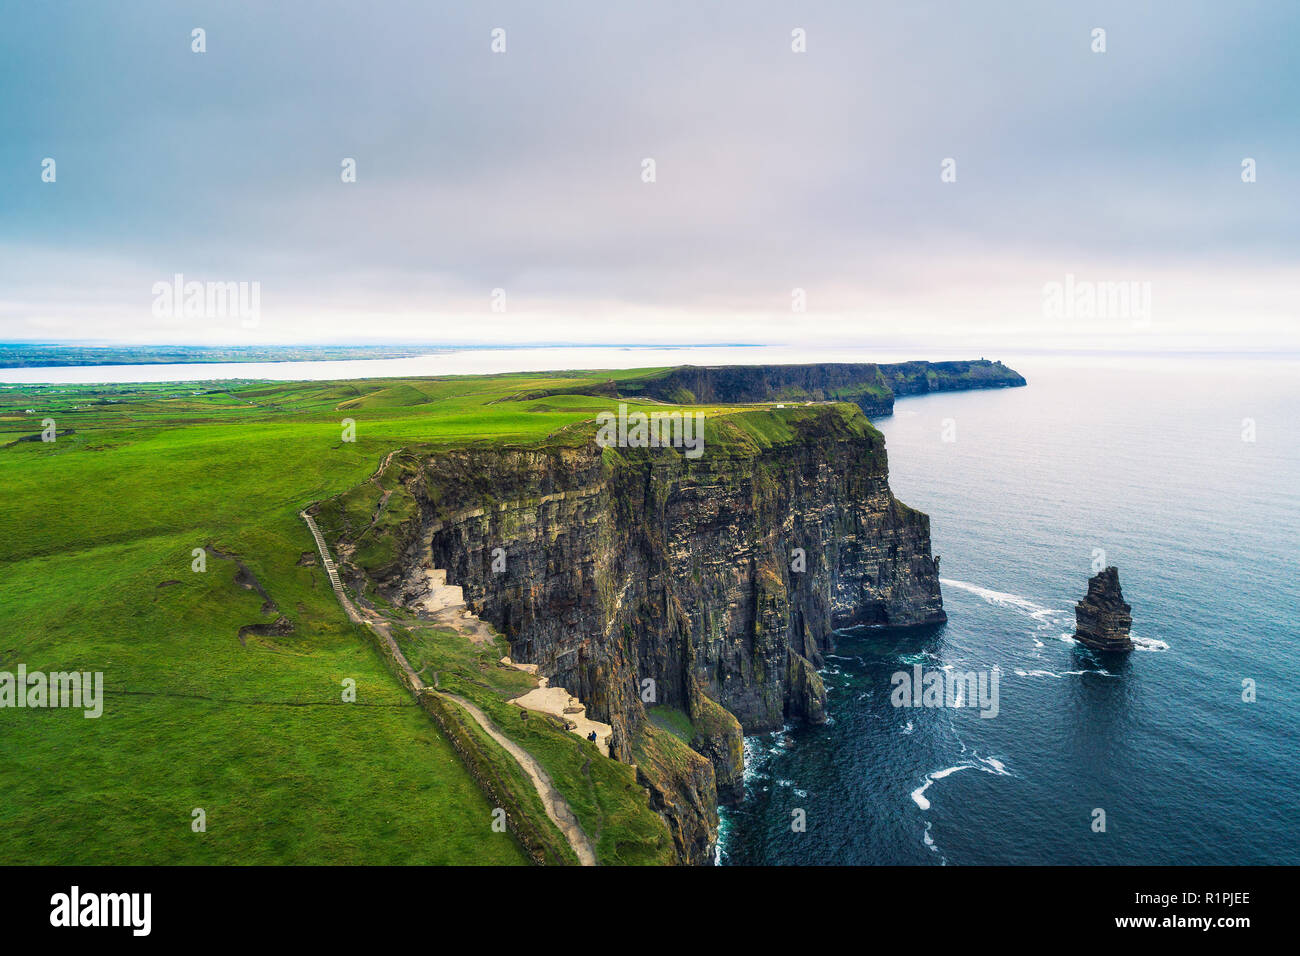 Aerial view of the scenic Cliffs of Moher in Ireland Stock Photo